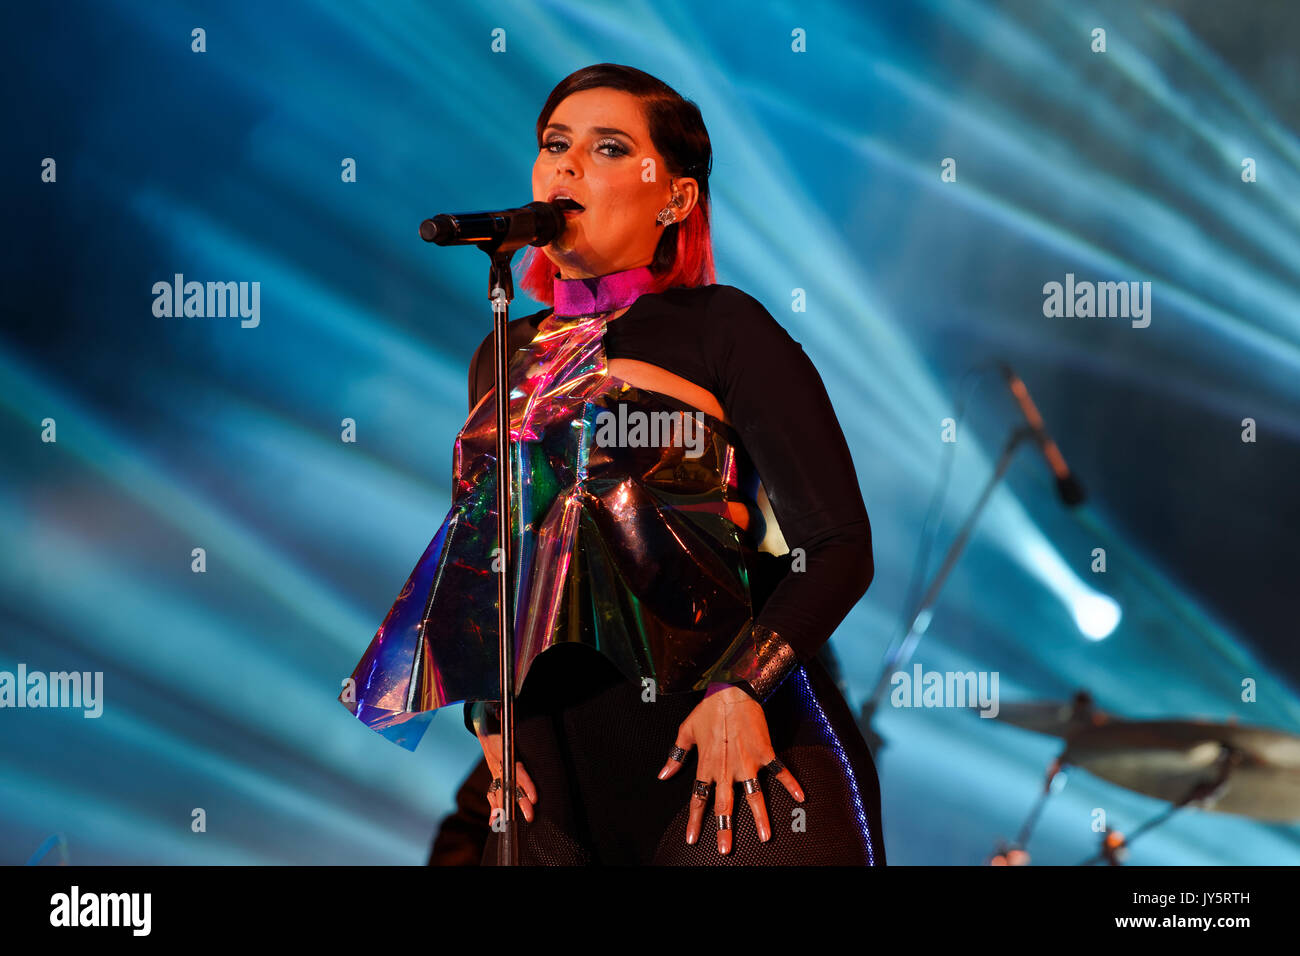 Montreal, Canada. 18th Aug, 2017. Montreal, Canada. 18/08/2017  Canadian singer Nelly Furtado performs on stage for the Canada Pride Montreal 2017 free outdoor concert. Credit: richard prudhomme/Alamy Live News Stock Photo